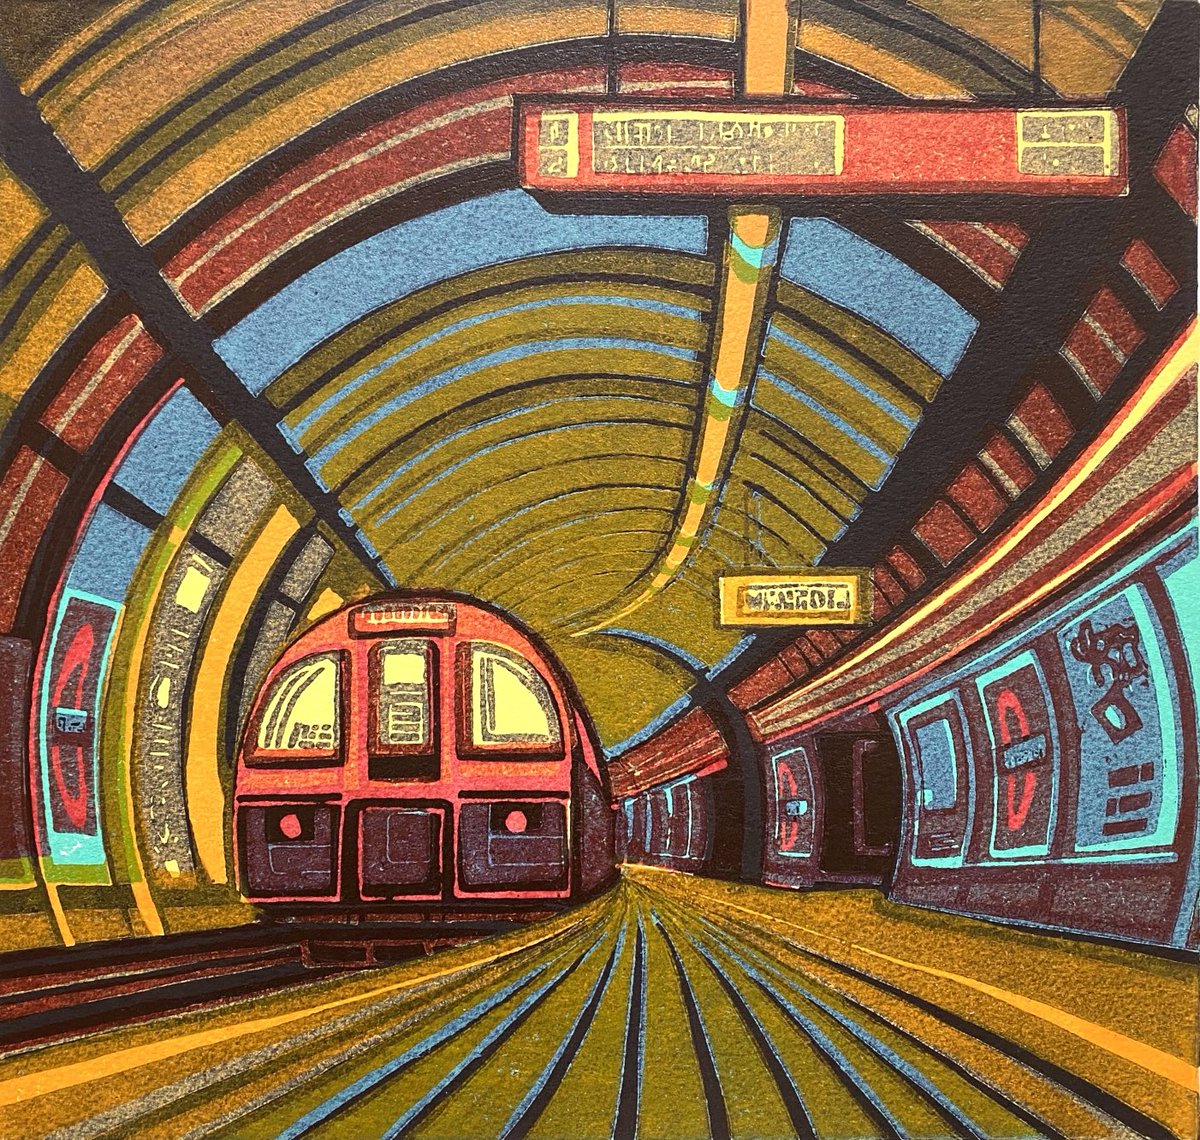 This rare linocut ‘Going Underground’ is in the @eamesfineart Summer Auction this weekend - lots of interesting and unusual pieces to bid on! Ends at 5pm on Sunday - here’s a link: eamesfineart.com/viewing-room/6… 😊
#printsforsale #originalprints